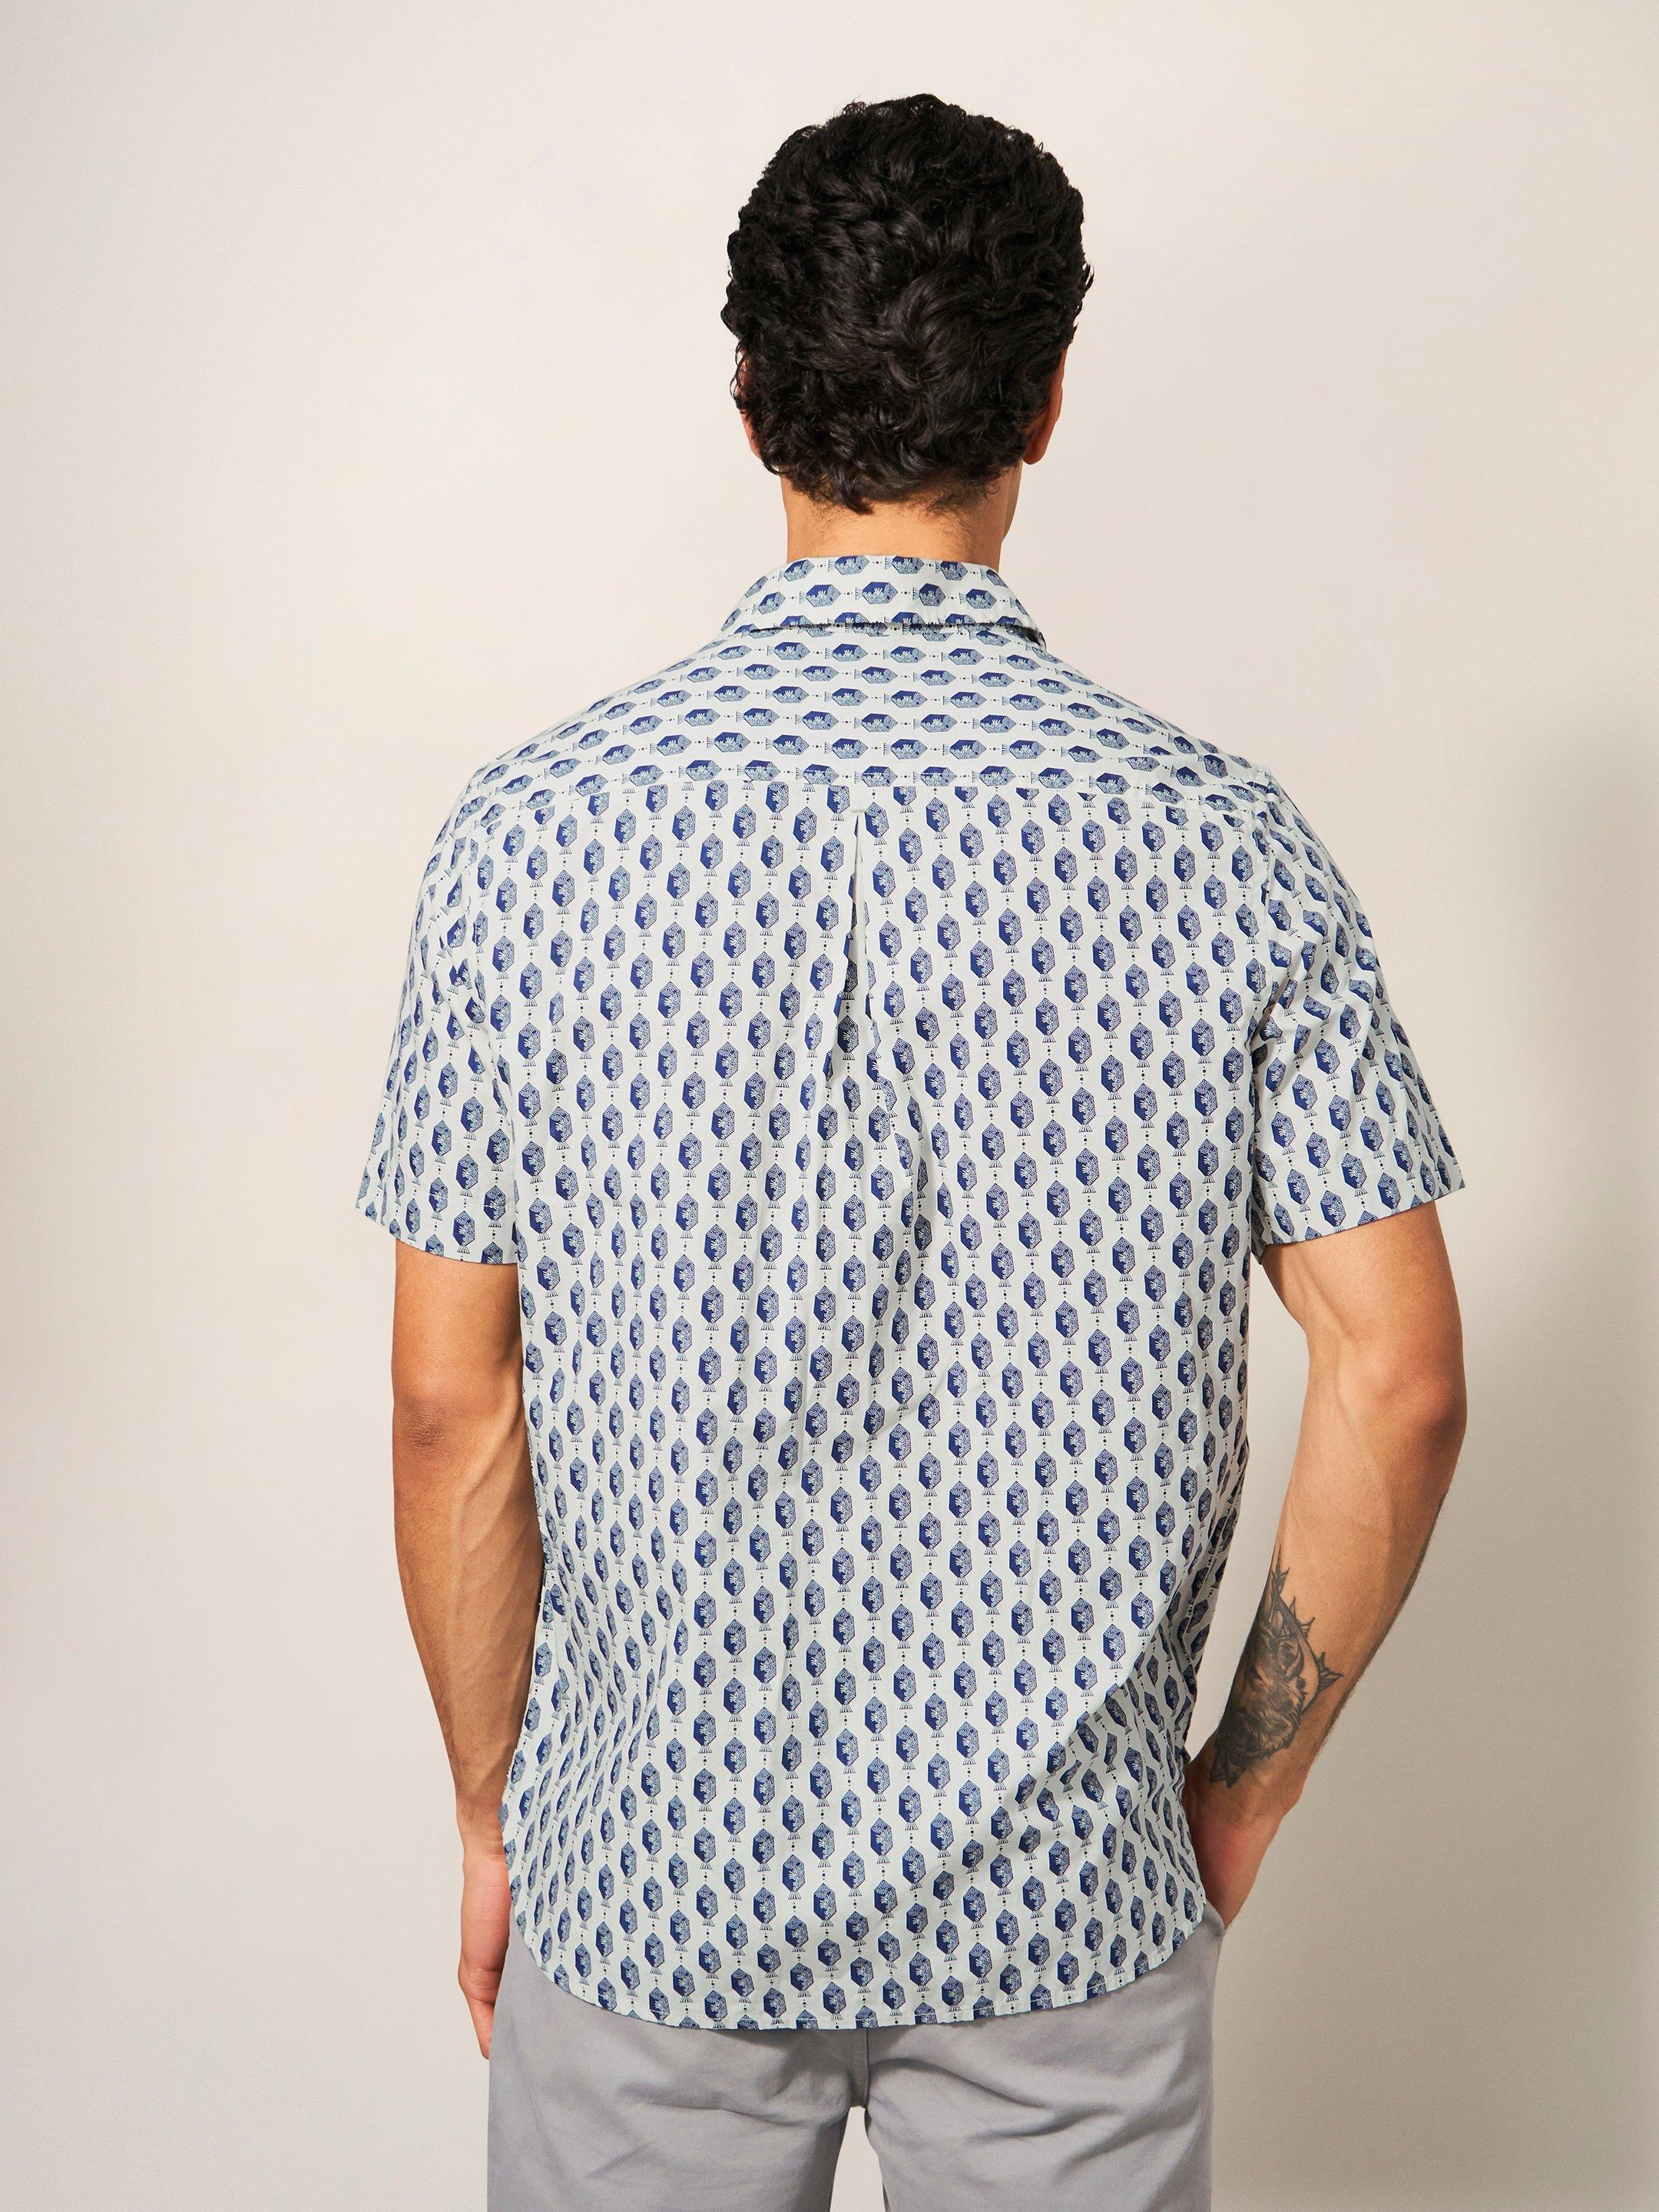 Linear Fish Printed SS Shirt in WHITE MLT - MODEL BACK